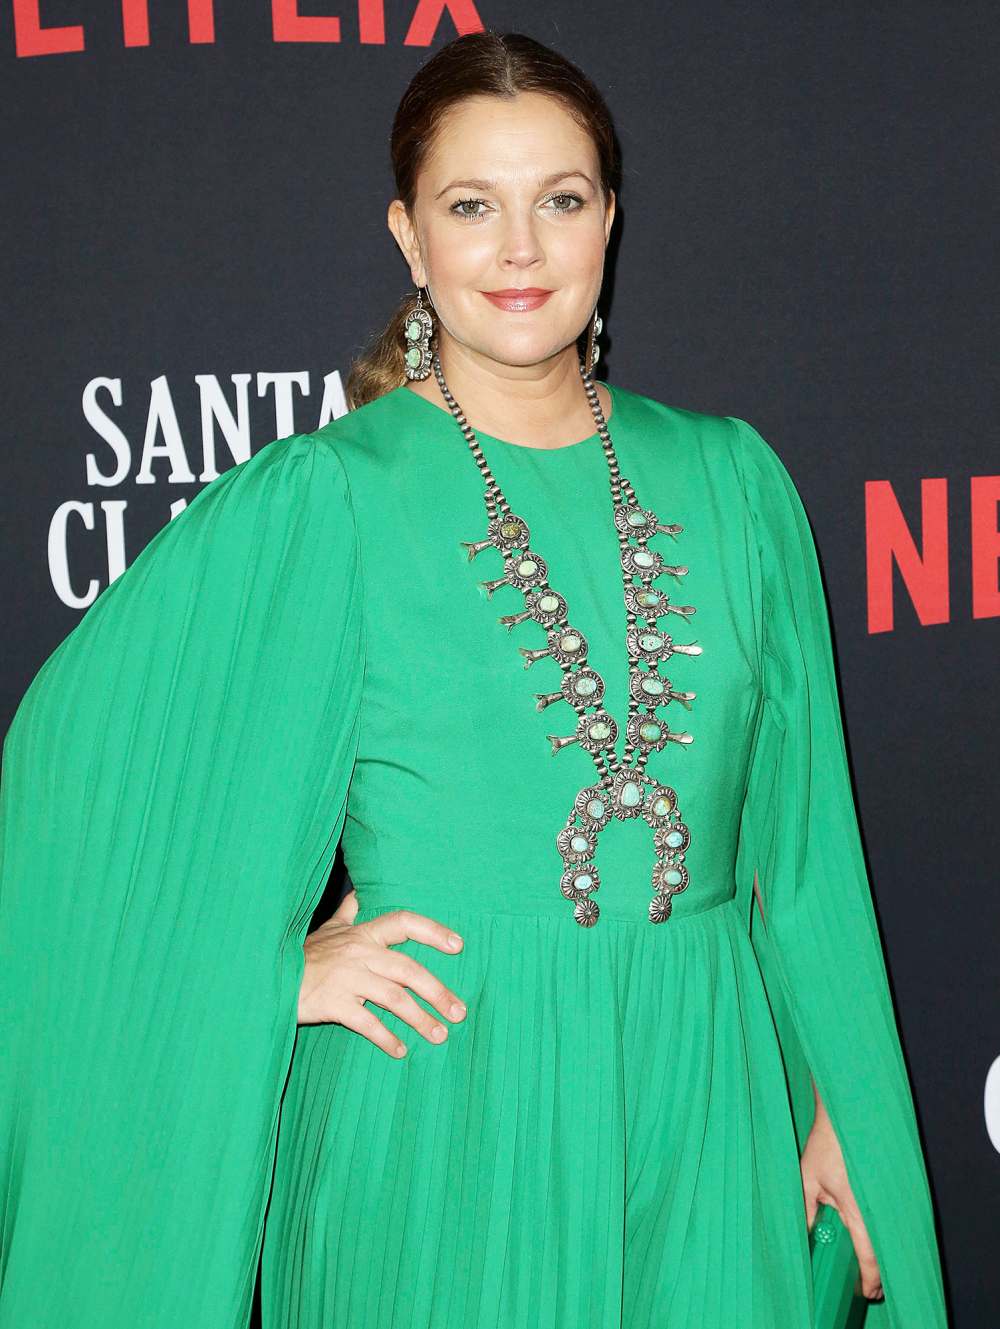 Drew Barrymore in a Green Dress in 2019 Drew Barrymore Forgives Mom Jaid for Sending Her to a Full Psychiatric Ward at 13